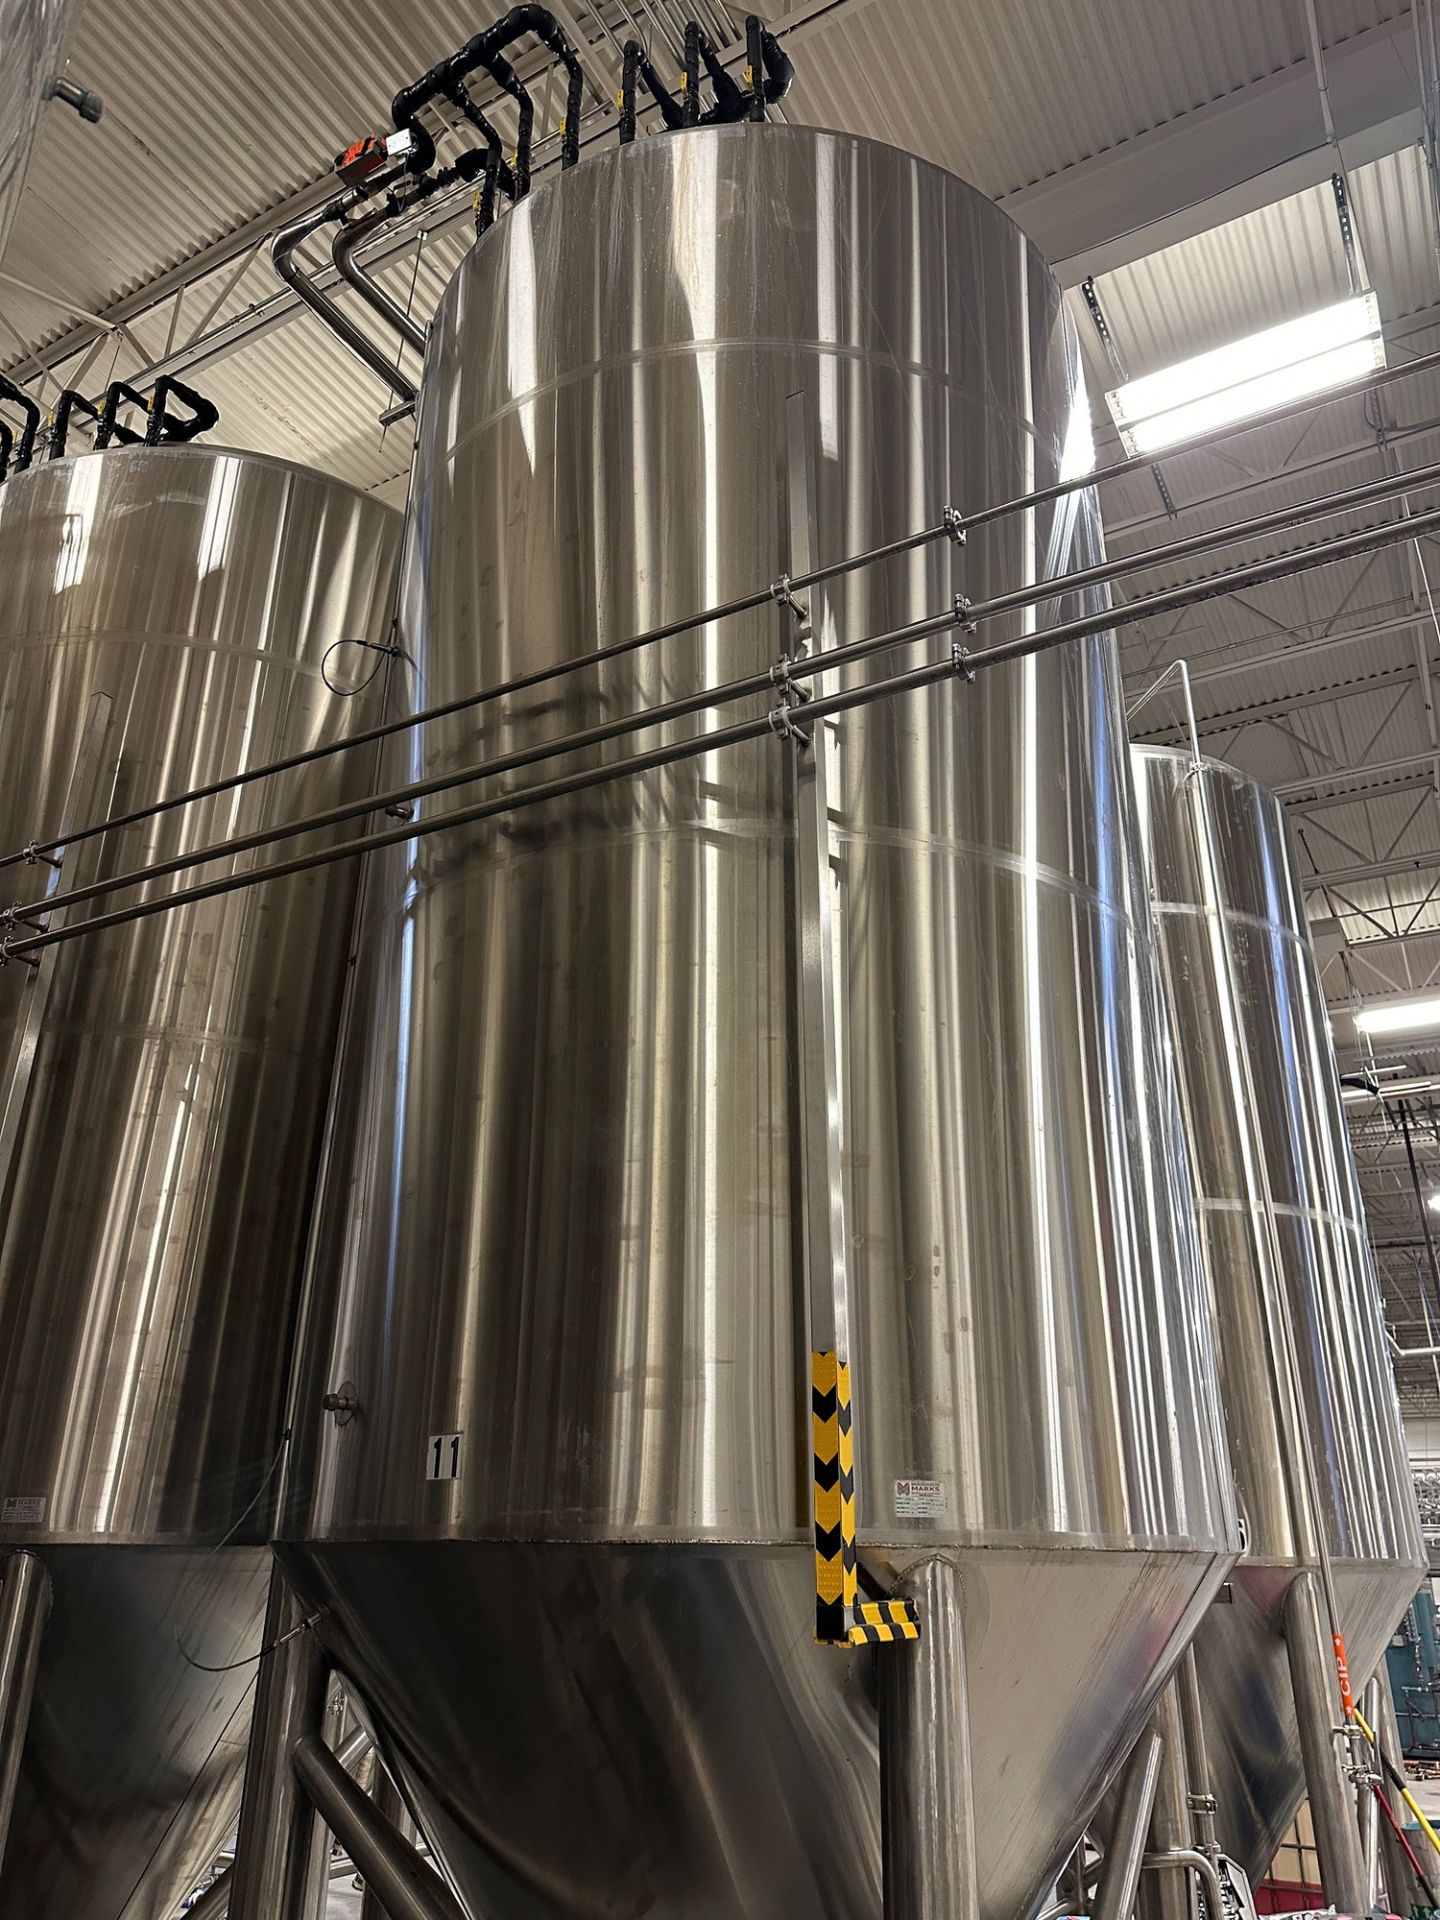 (1 of 8) 2020 Marks 132 BBL FV / 175 BBL or 5,400 Gal Max Capacity Jacketed Stainless Steel Ferm - Image 4 of 5